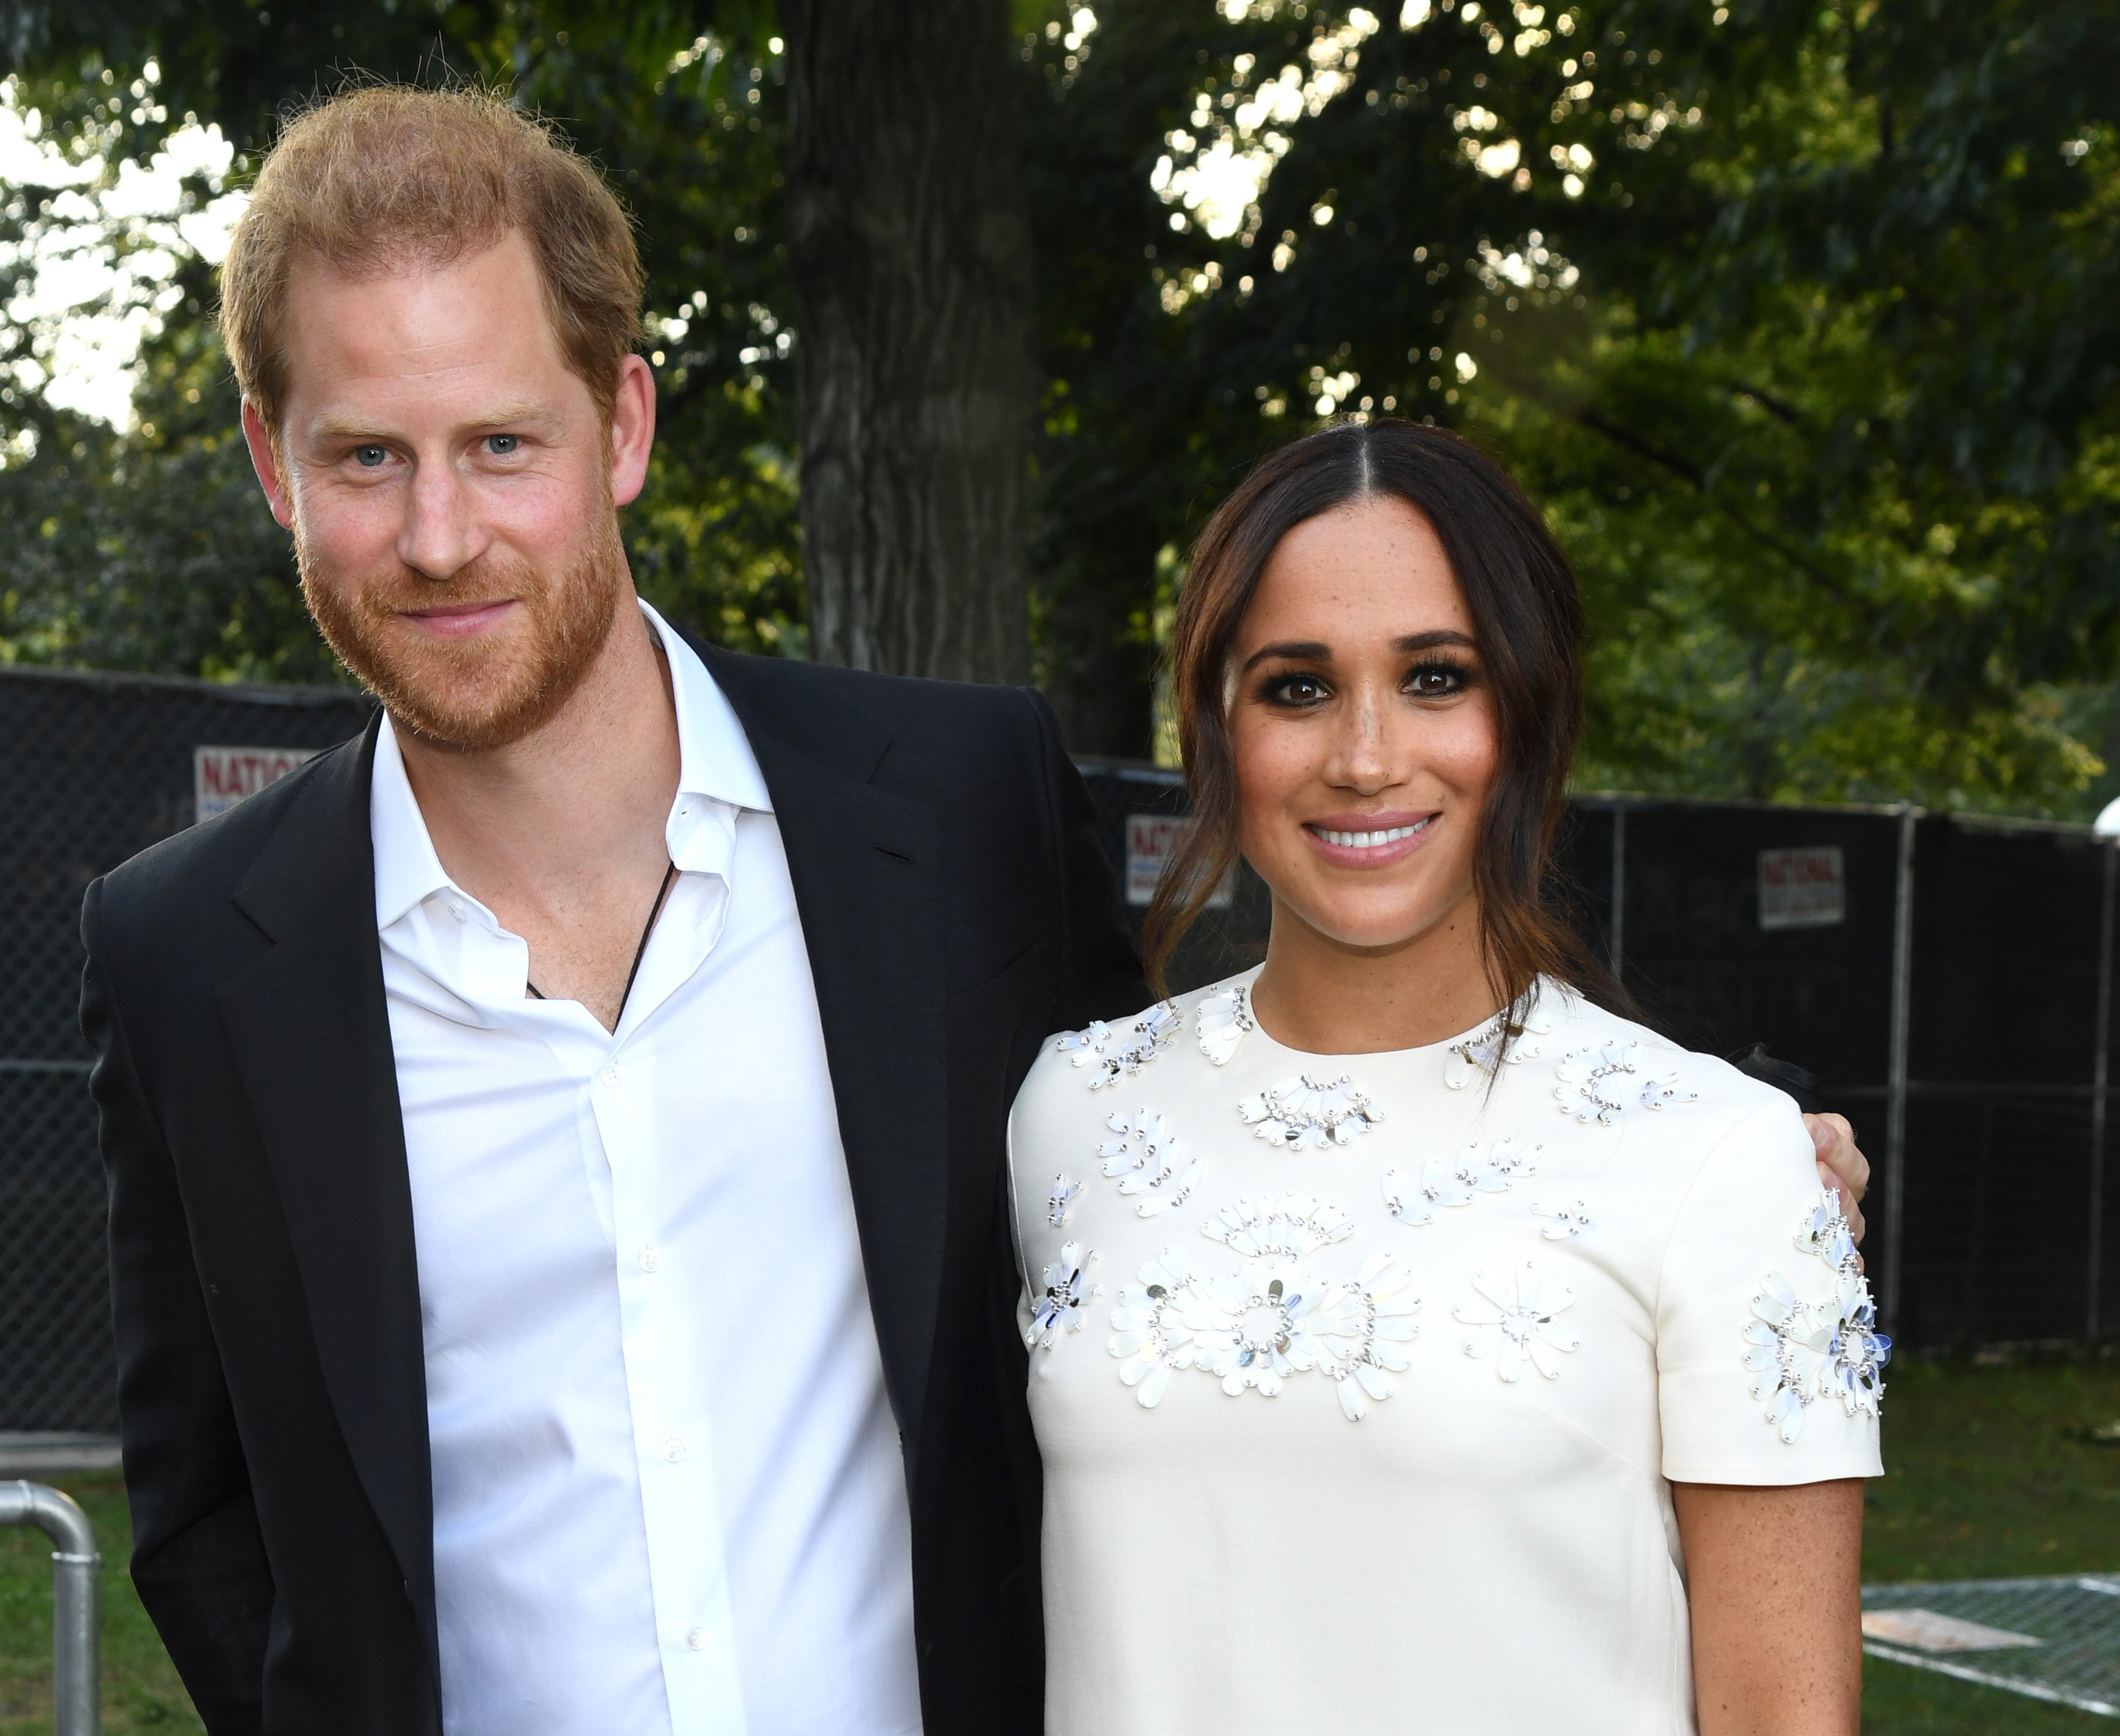 Prince Harry and Meghan Markle, who have hired a director for their Netflix reality show, pose for a photo at the New York Global Citizen Live